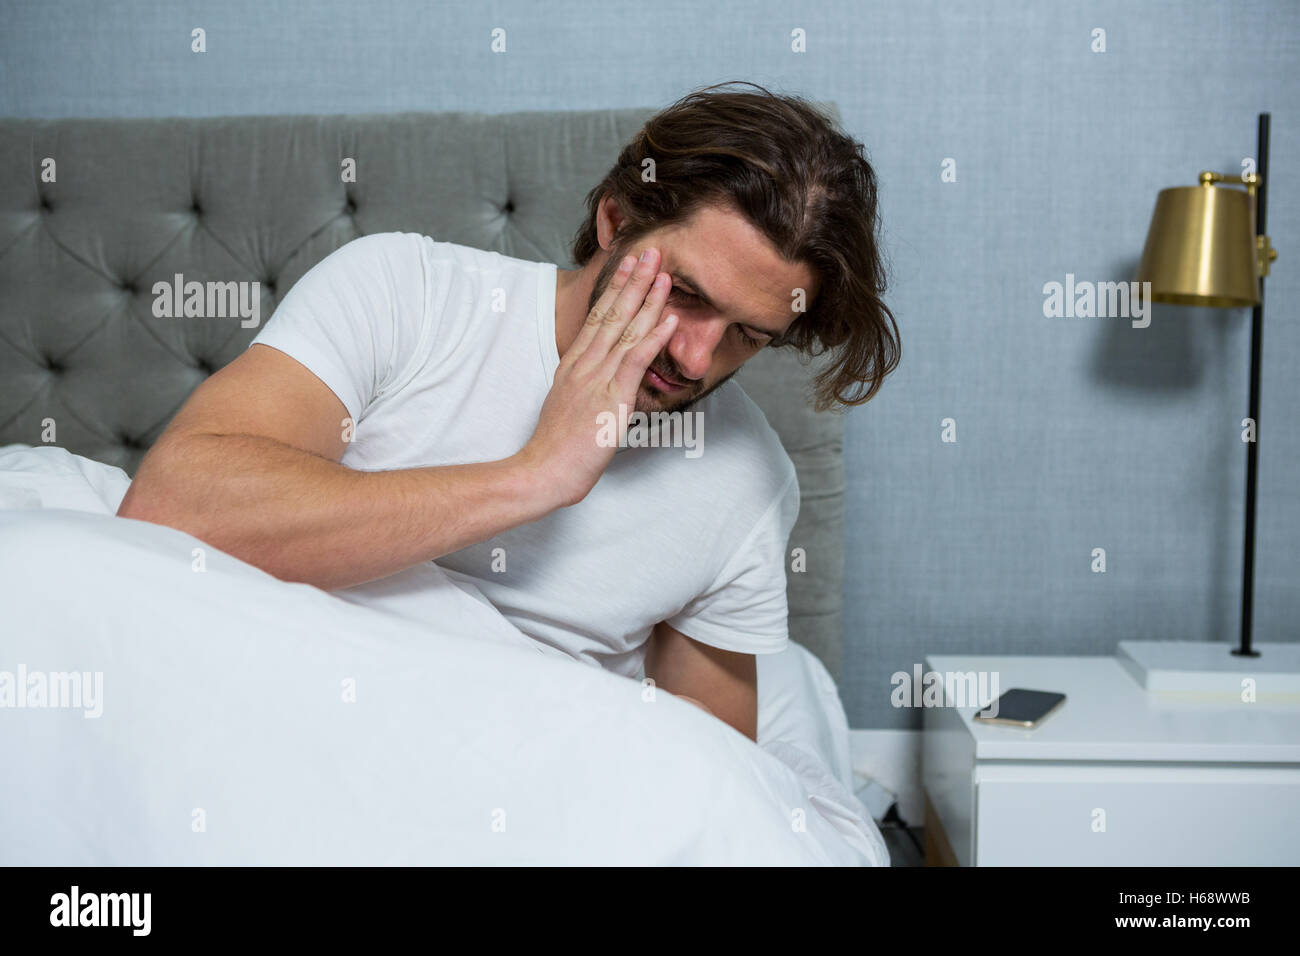 Man waking up from sleep in bedroom Stock Photo